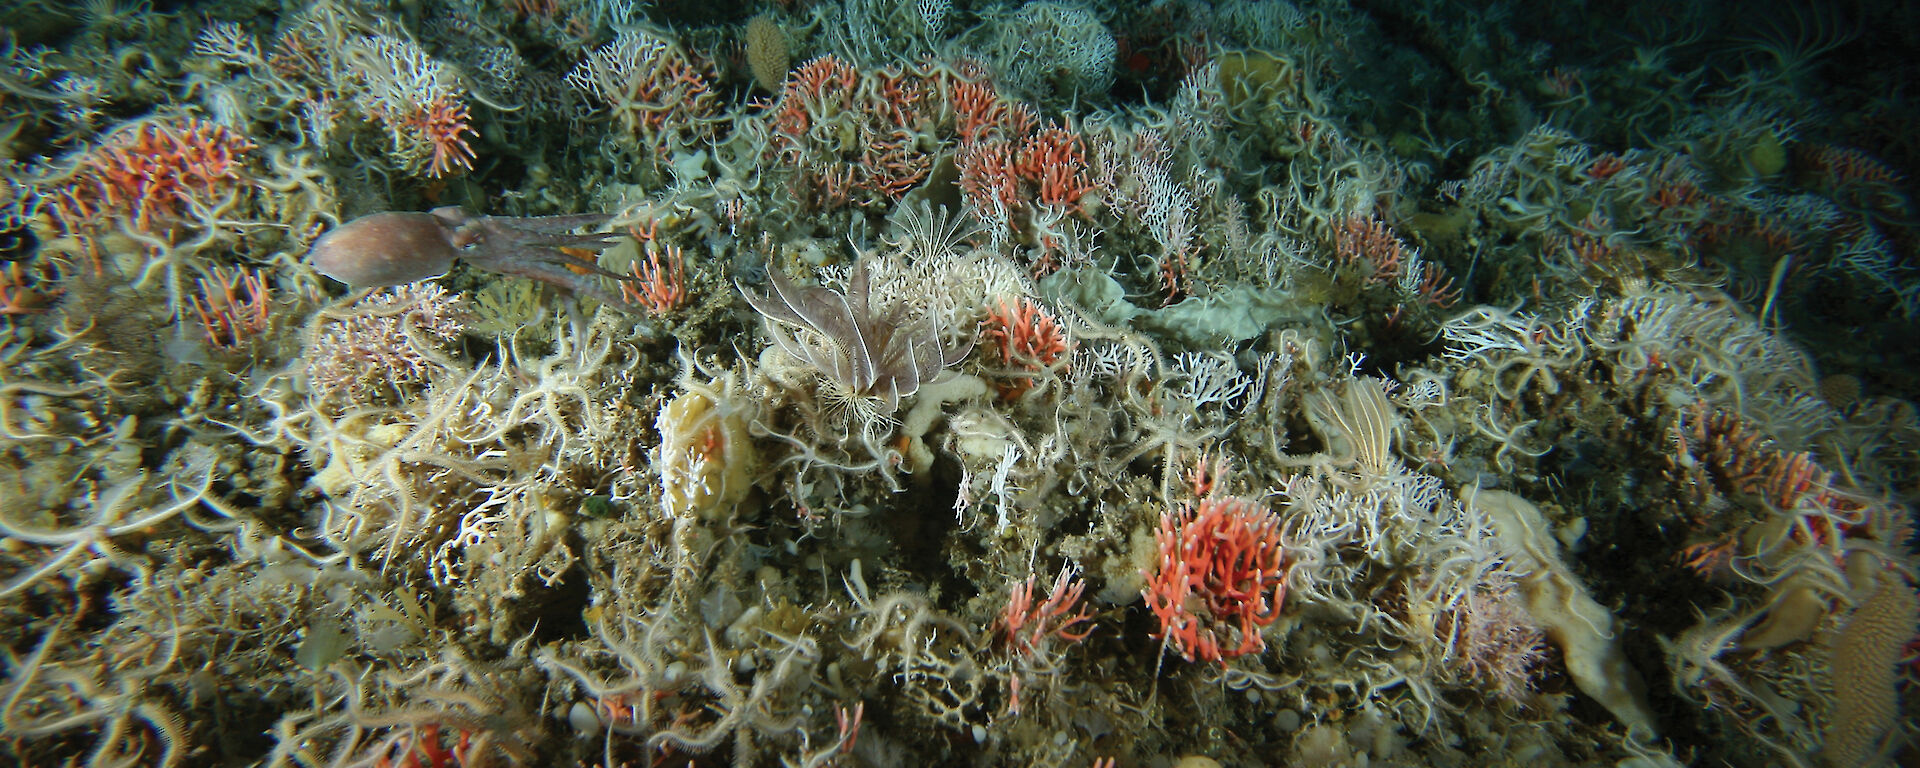 A rich sea floor community discovered during the Collaborative East Antarctic Marine Census.